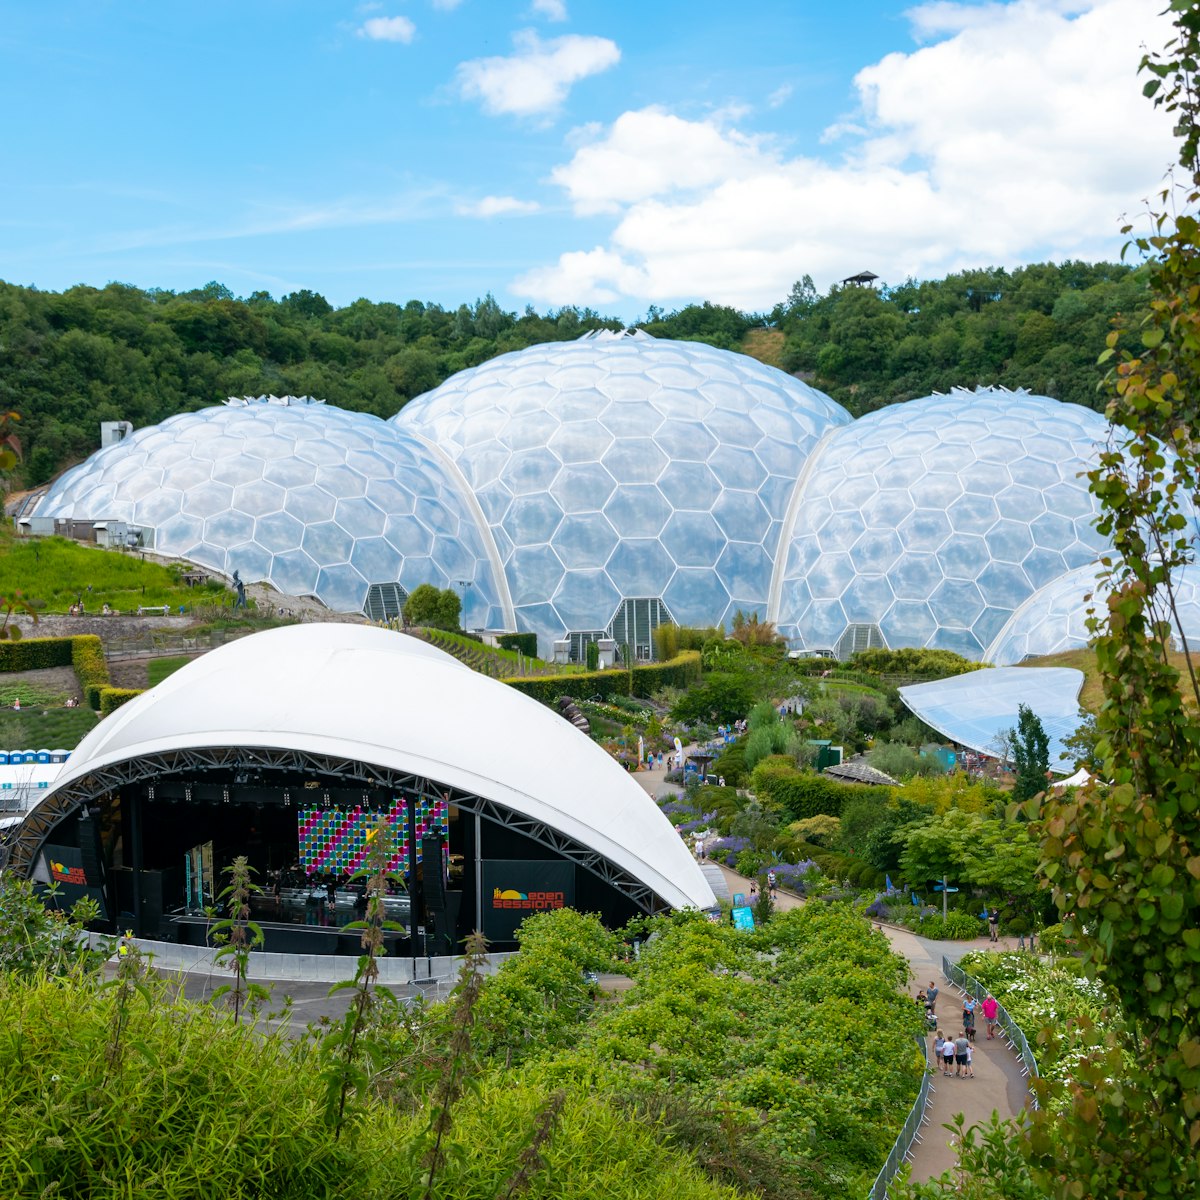 ST AUSTELL, ENGLAND - JULY 2, 2019: Eden Sessions music concert at Eden Project eco visitor attraction in Cornwall, England.
1494239609
architecture, attraction, biome, biosphere, bodelva, britain, british, building, concert, conservation, cornwall, design, destination, dome, earth, eco, ecosystem, eden project, eden sessions, education, educational, england, english, environment, garden, greenhouse, horticulture, indoor, kylie minogue, landmark, mediterranean, music, nature, outdoor, plants, rainforest, sphere, st austell, summer, sustainability, sustainable tourism, tourism, tourist, travel, tropical, uk, united kingdom, vacation, venue, visitor